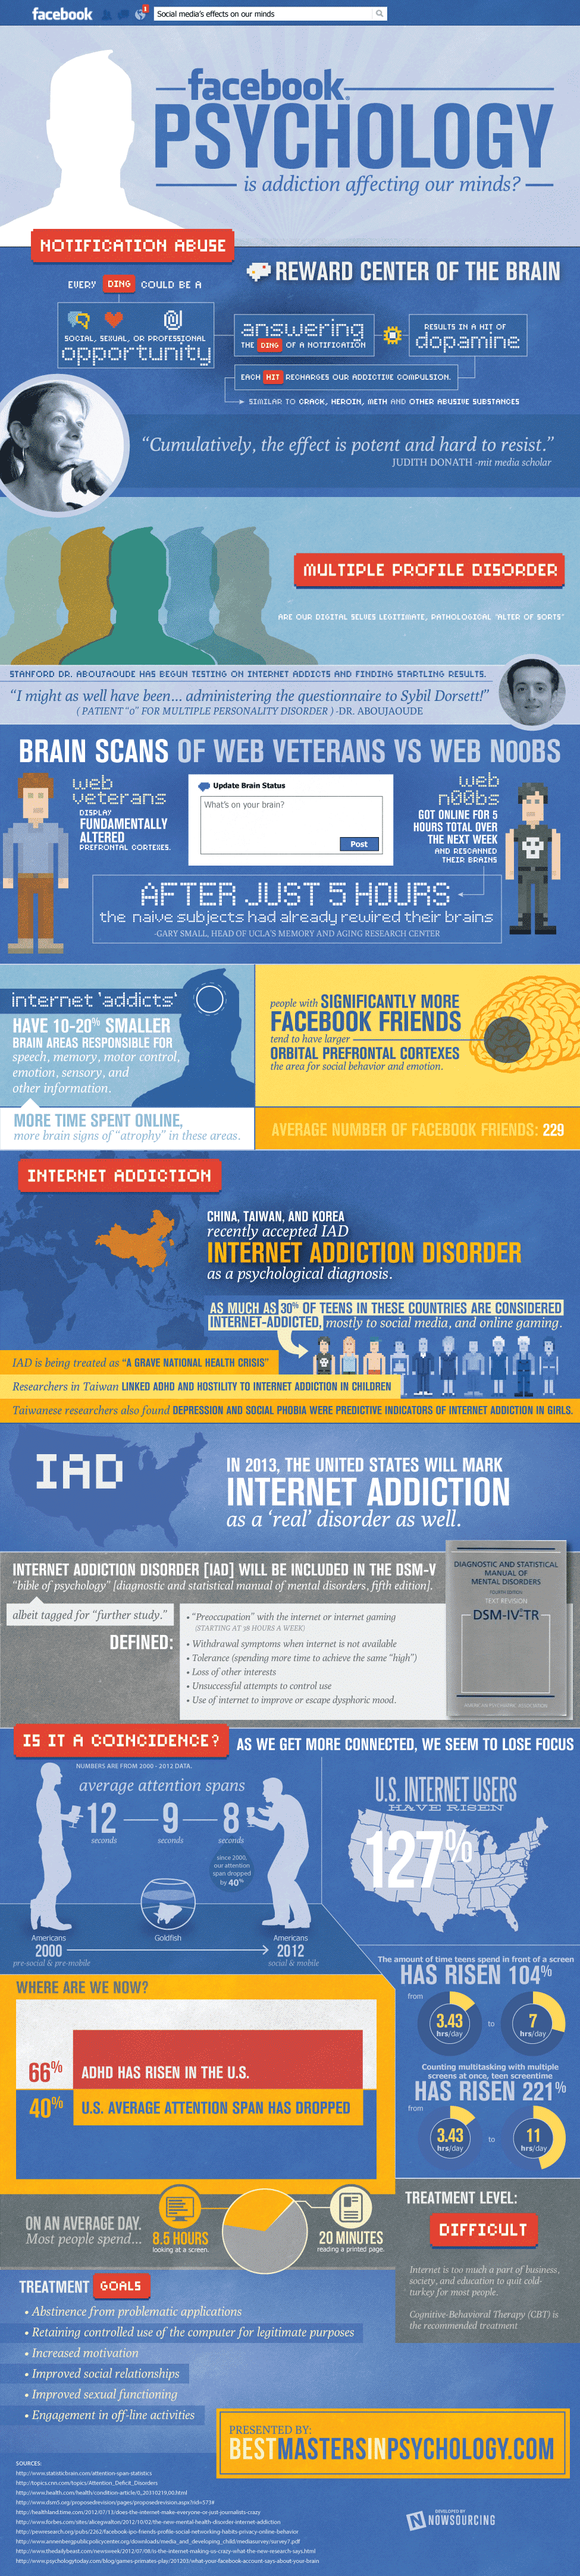 facebook-addiction-effects-psychology-infographic